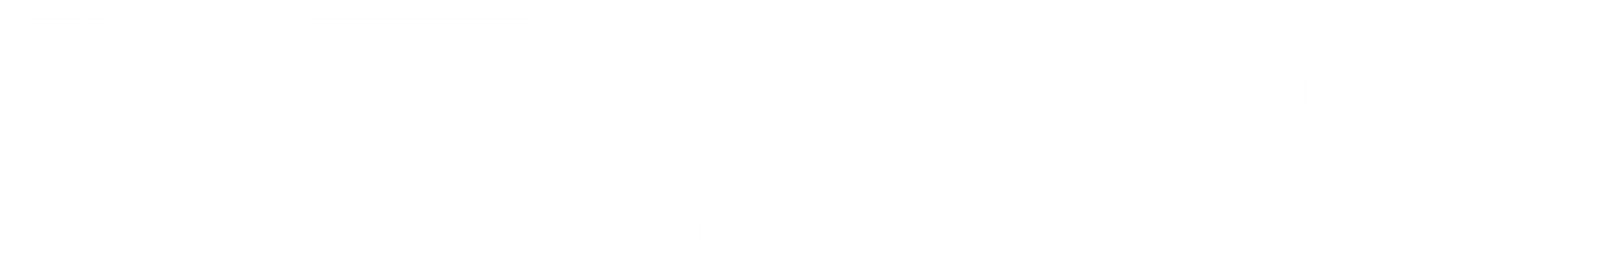 D&T Real Estate Group